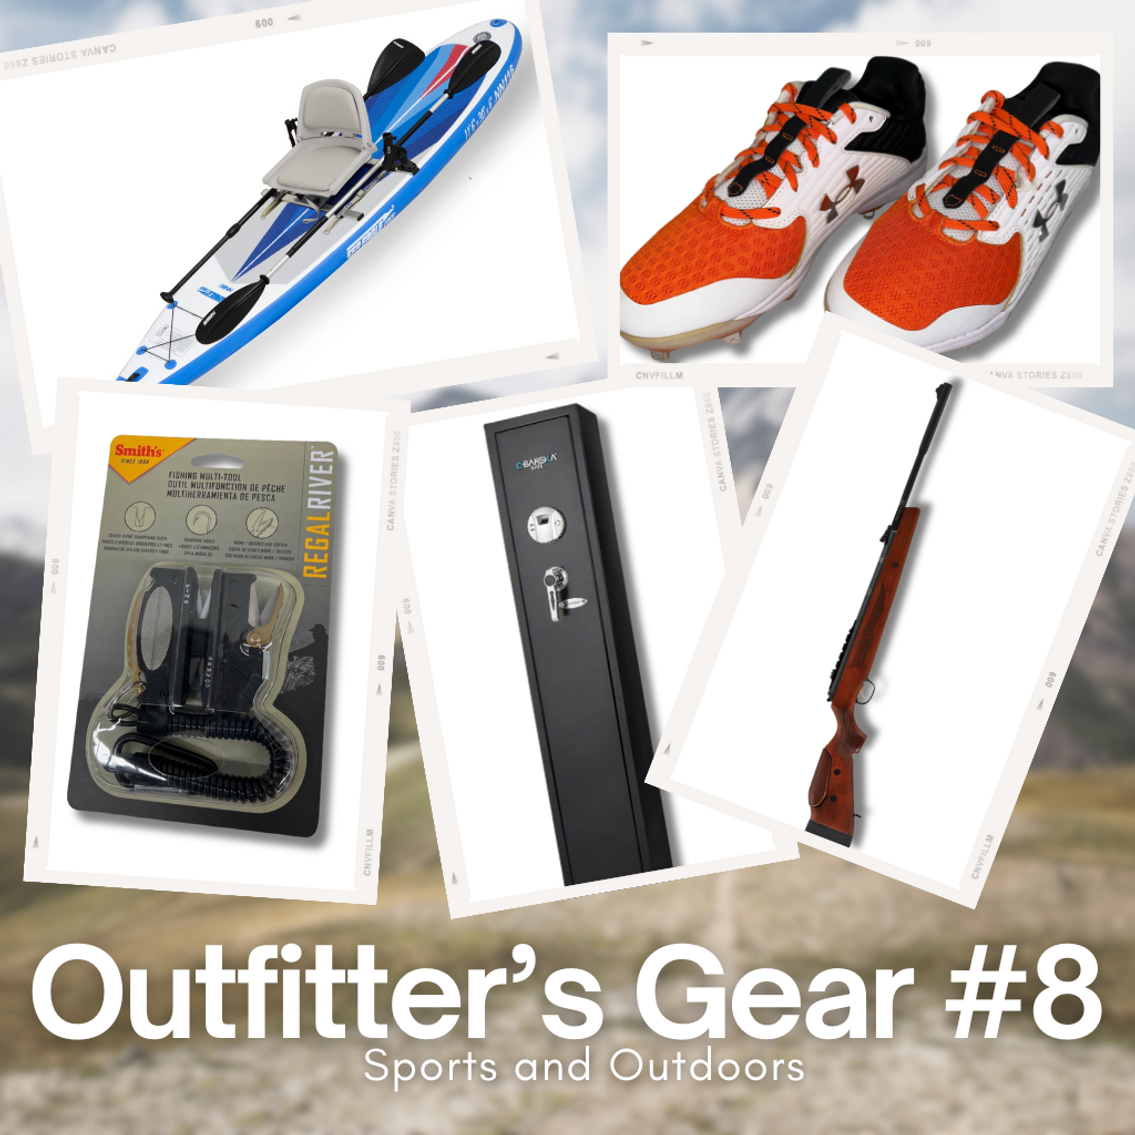 Outfitter's Gear #8 - Sports and Outdoors